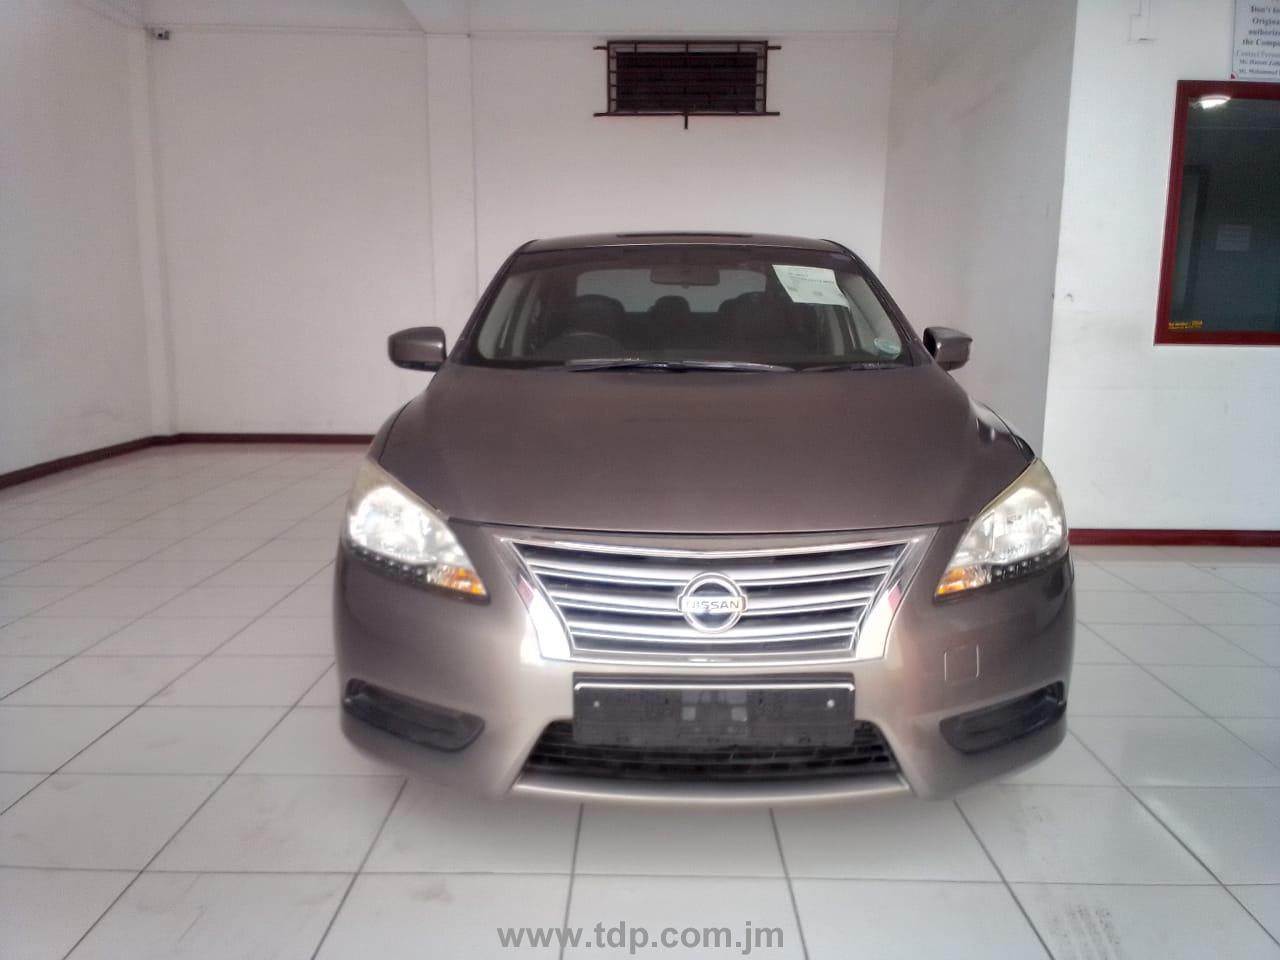 NISSAN SYLPHY 2015 Image 22